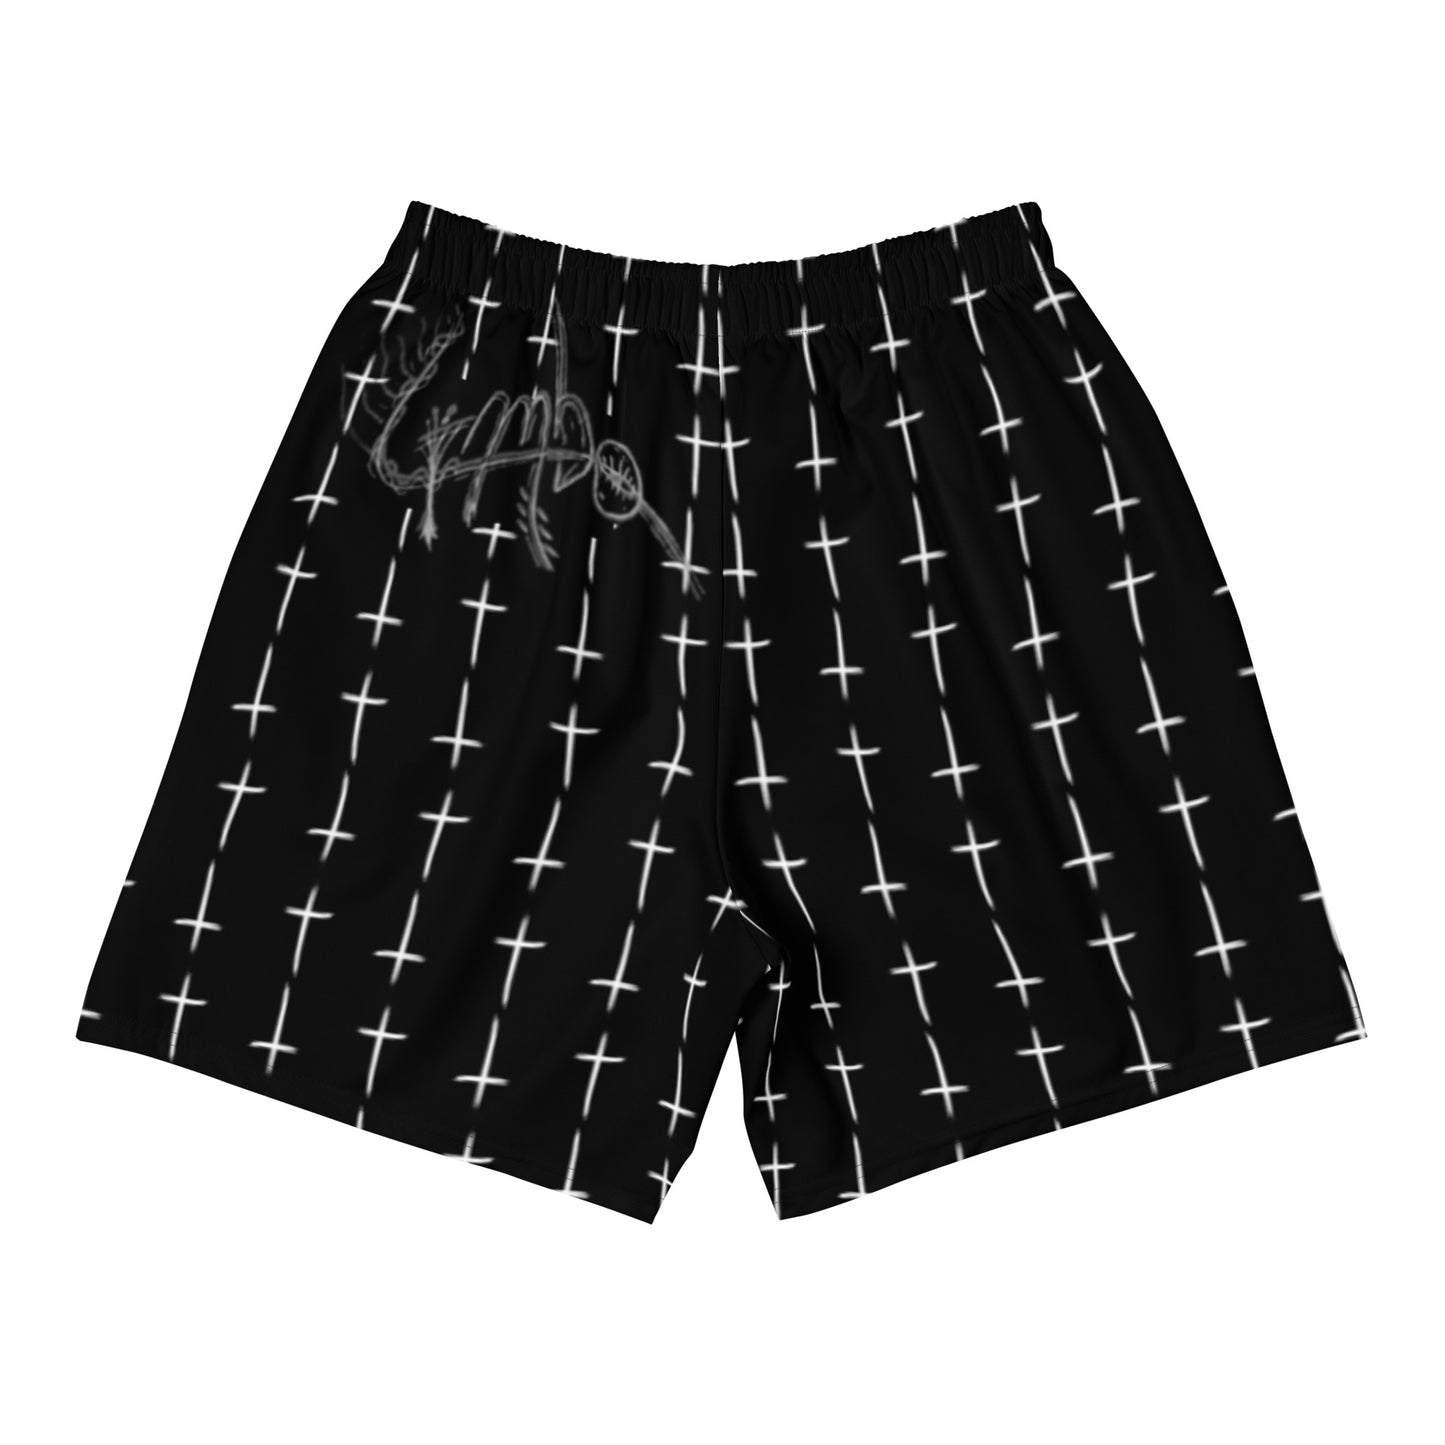 HEAVEN/HELL ATHLETIC SHORTS